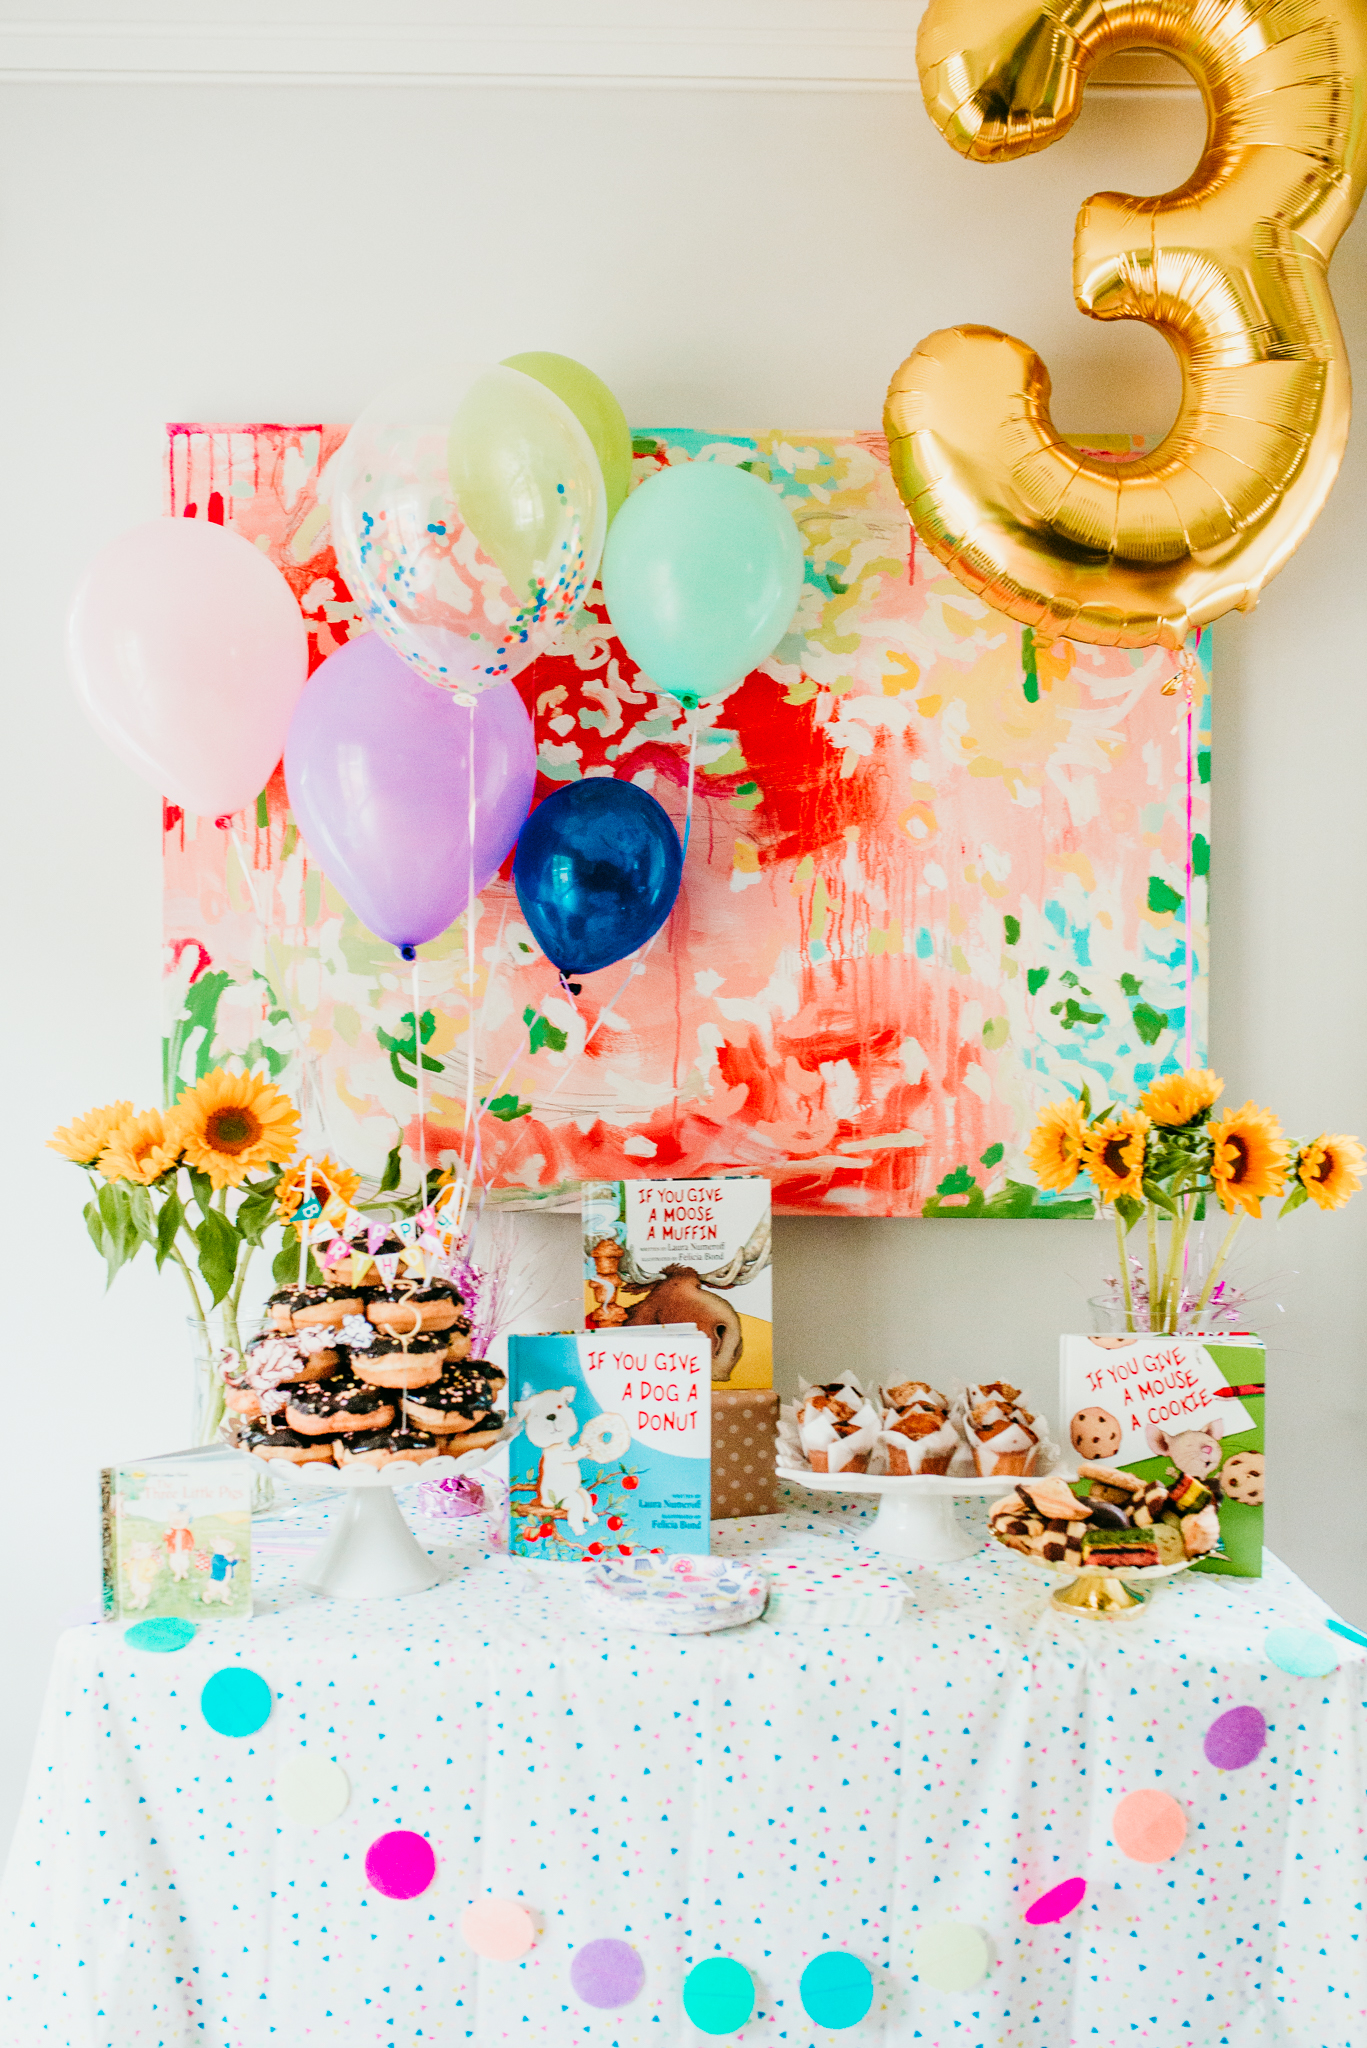 Brunch Party Ideas for a Grown Up Birthday